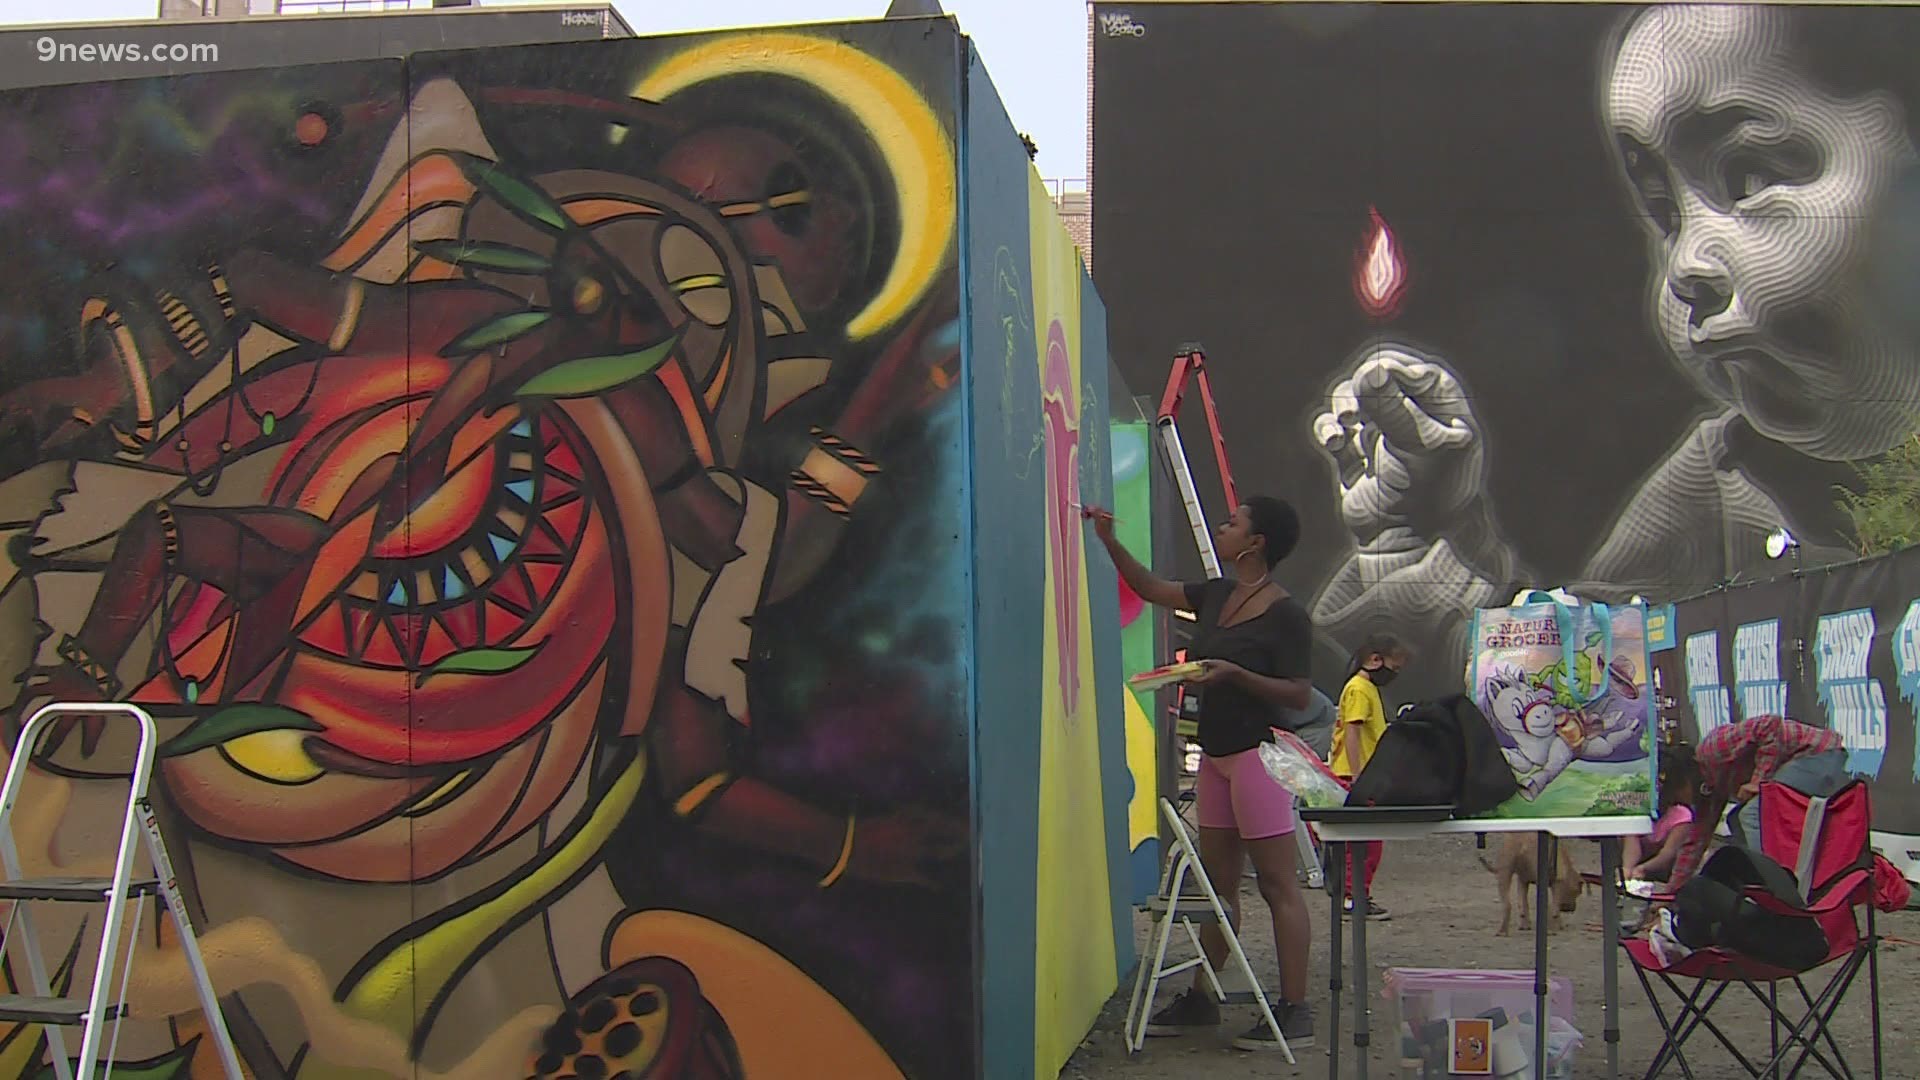 Organizers for Crush Walls in the River North Art District say the event already lends itself to social distancing.